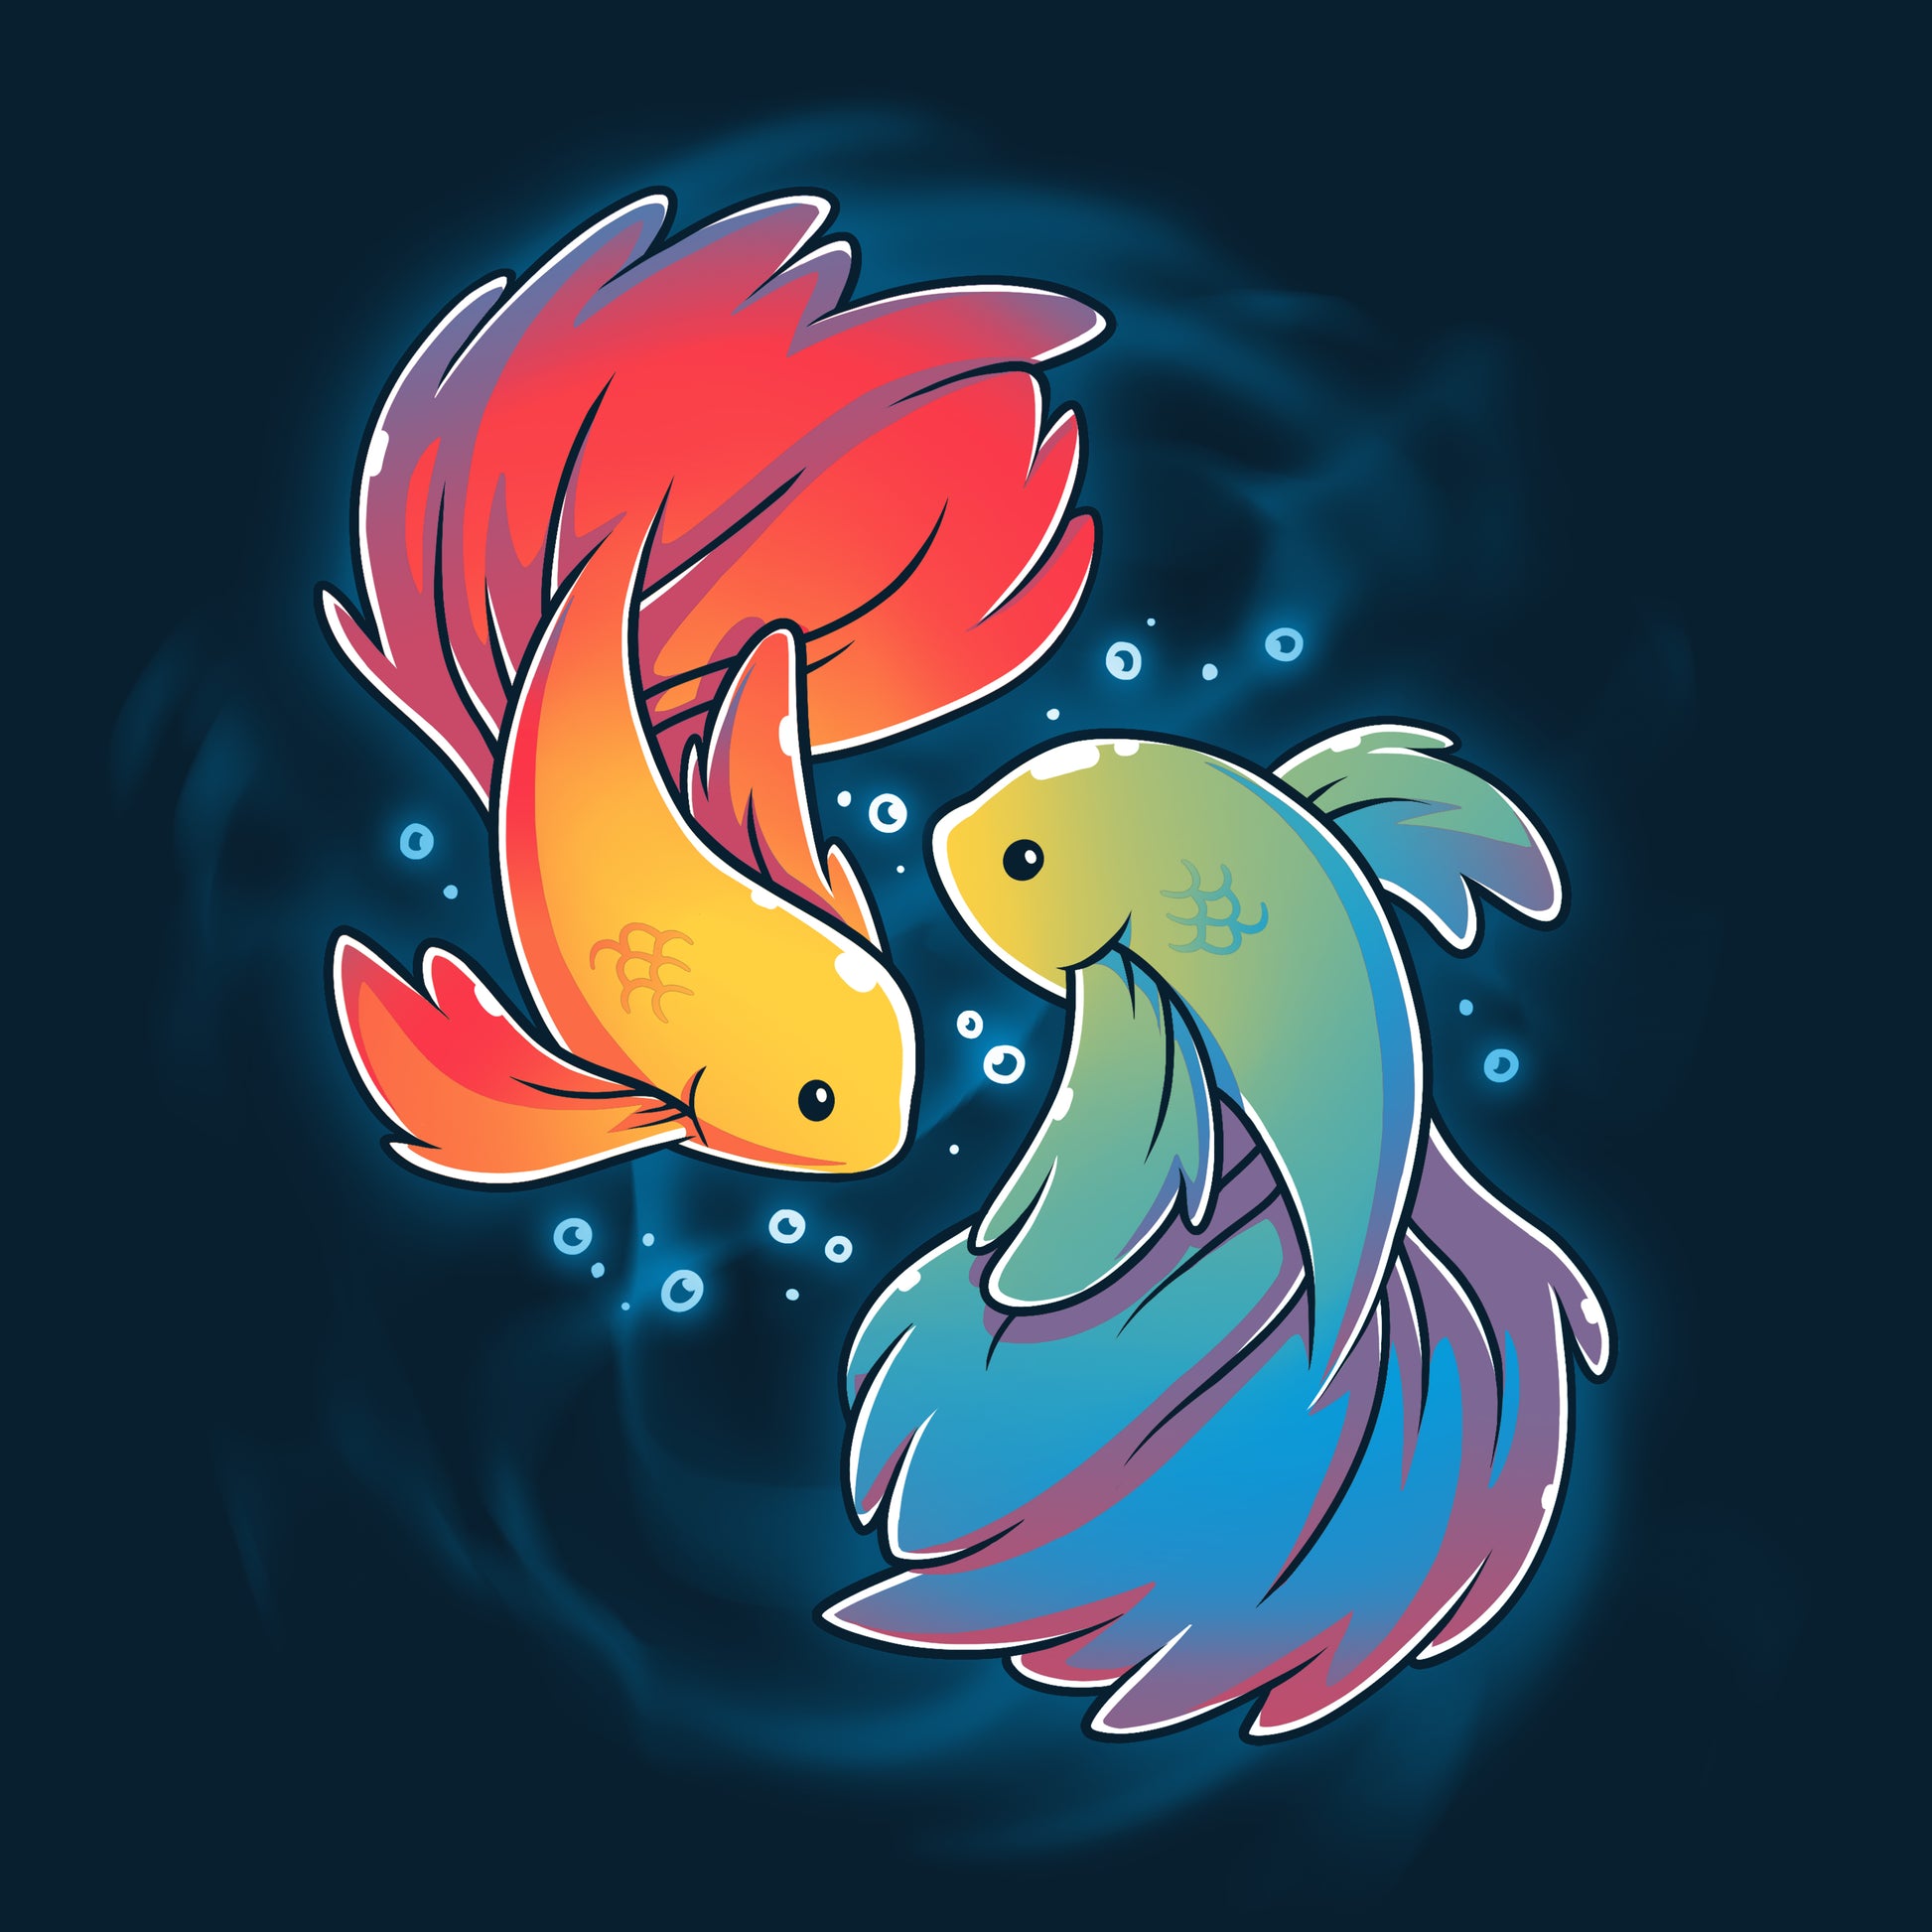 Two Rainbow Betta fish swimming together in vibrant colors on a dark background. Brand: TeeTurtle.